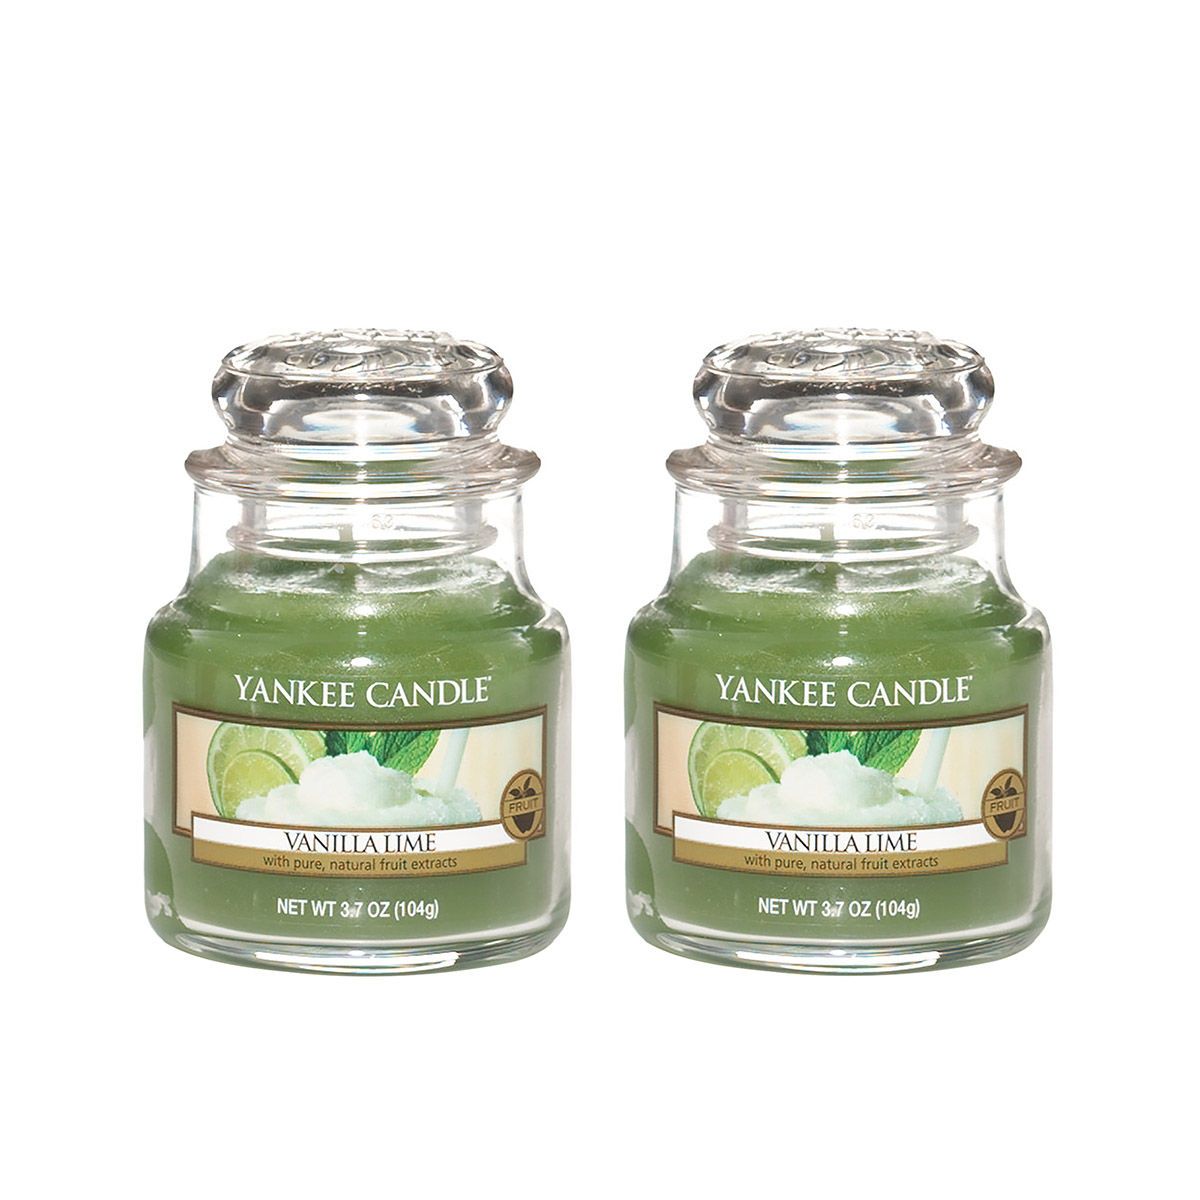 Yankee Candle Classic Jar Vanilla Lime Scented Candles - Pack of 2